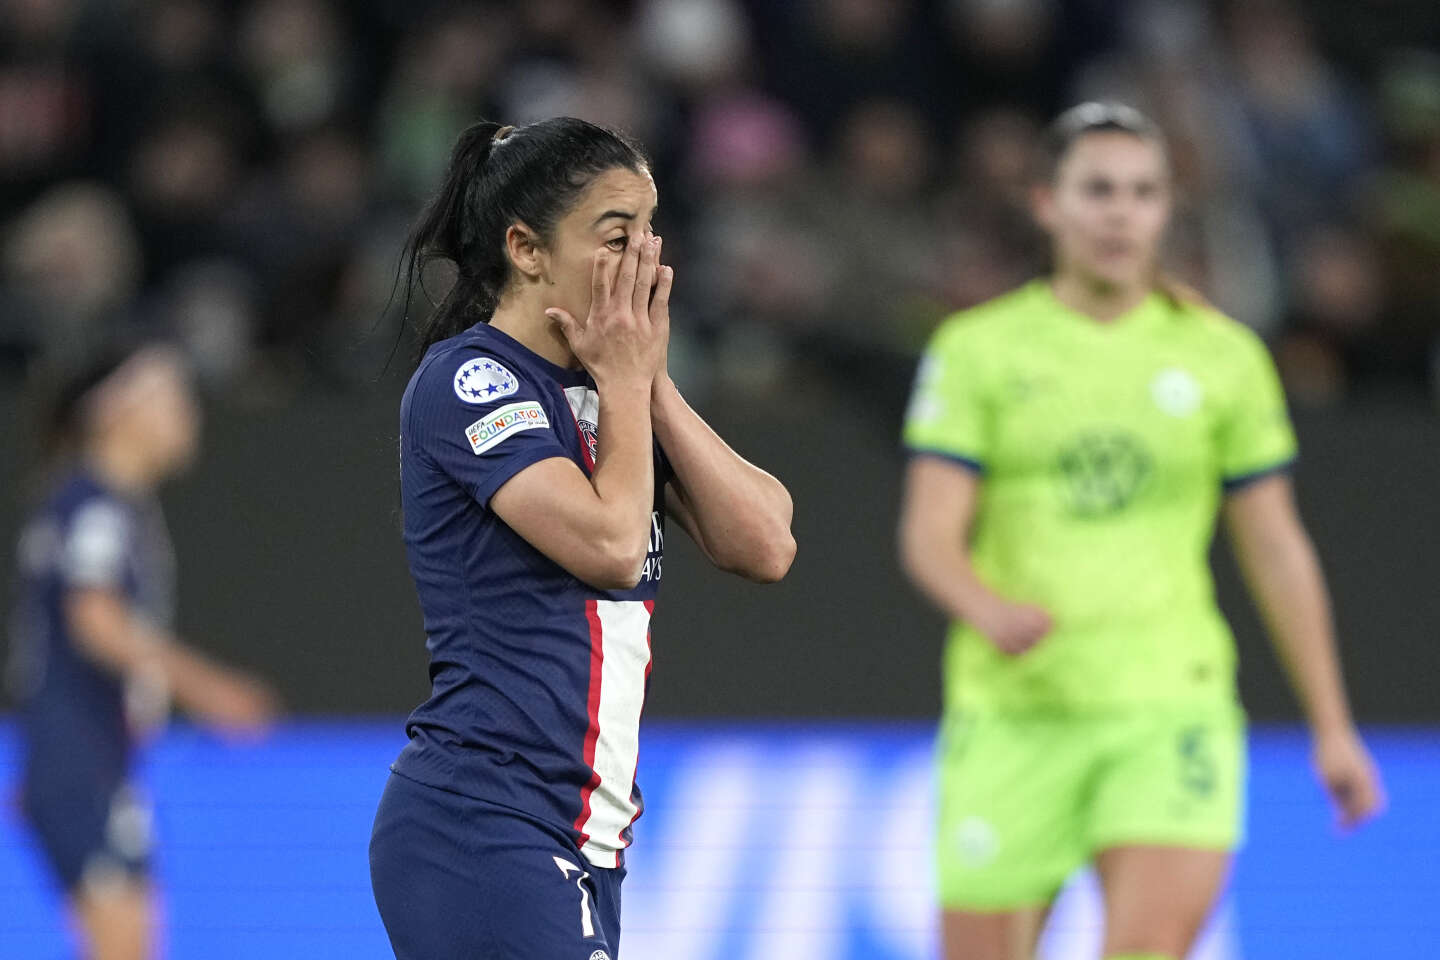 the Parisiennes eliminated in the quarter-finals by Wolfsburg